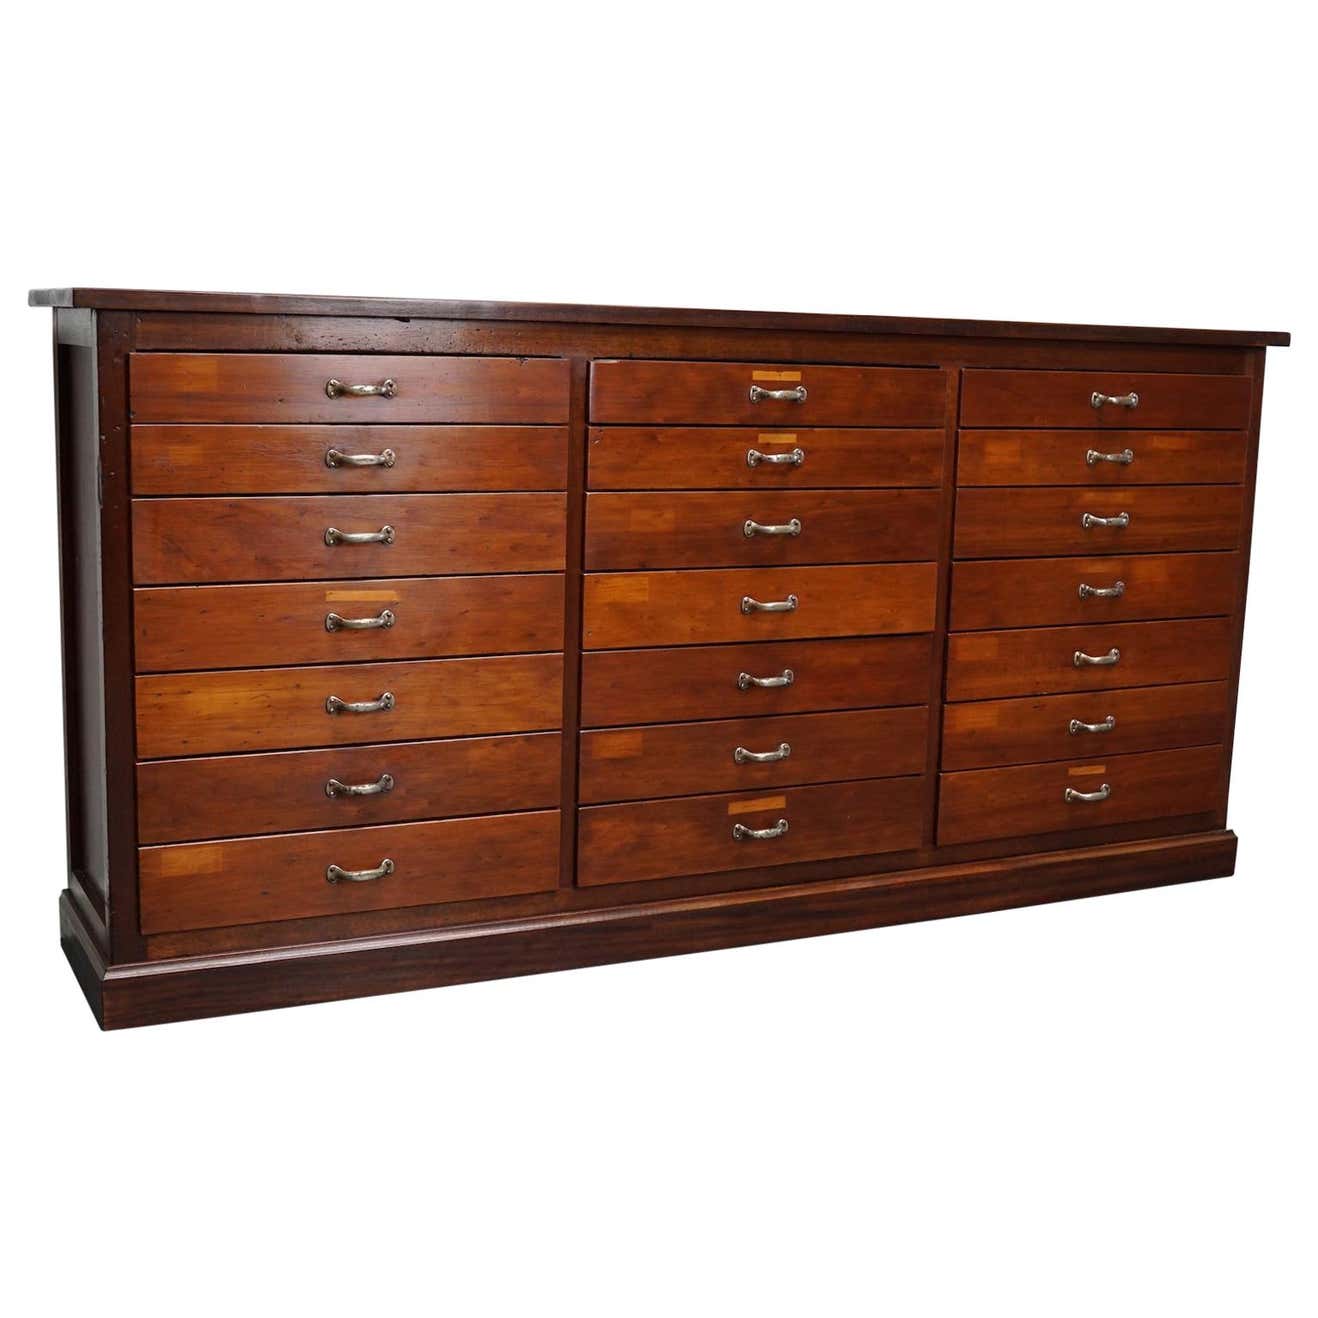 British Mahogany Apothecary Cabinet or Bank of Drawers, 1930s For Sale